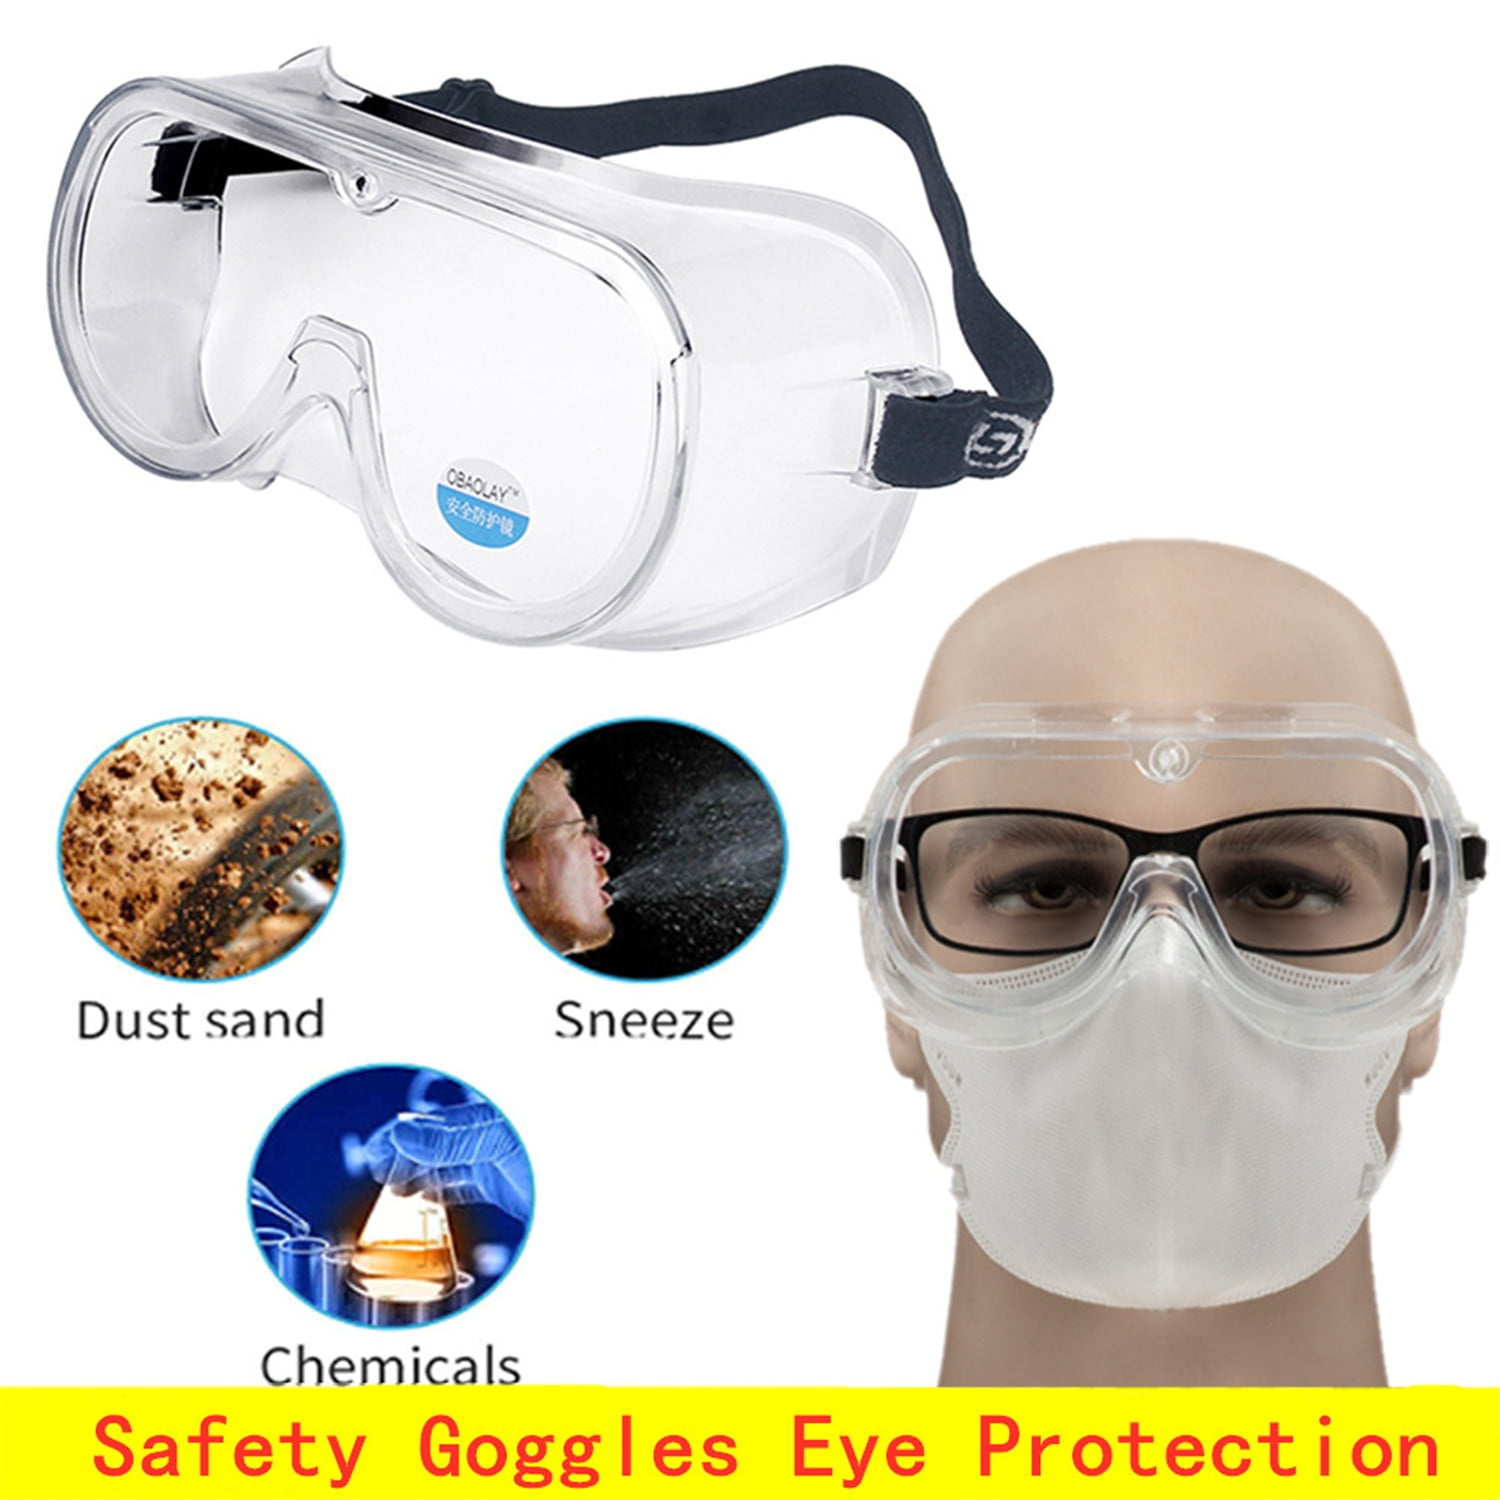 SAFETY FROM HUMAN FLUID DROPLETS-DEWALT ANTI FOG 360 DEGREE PROTECTION GOGGLES 